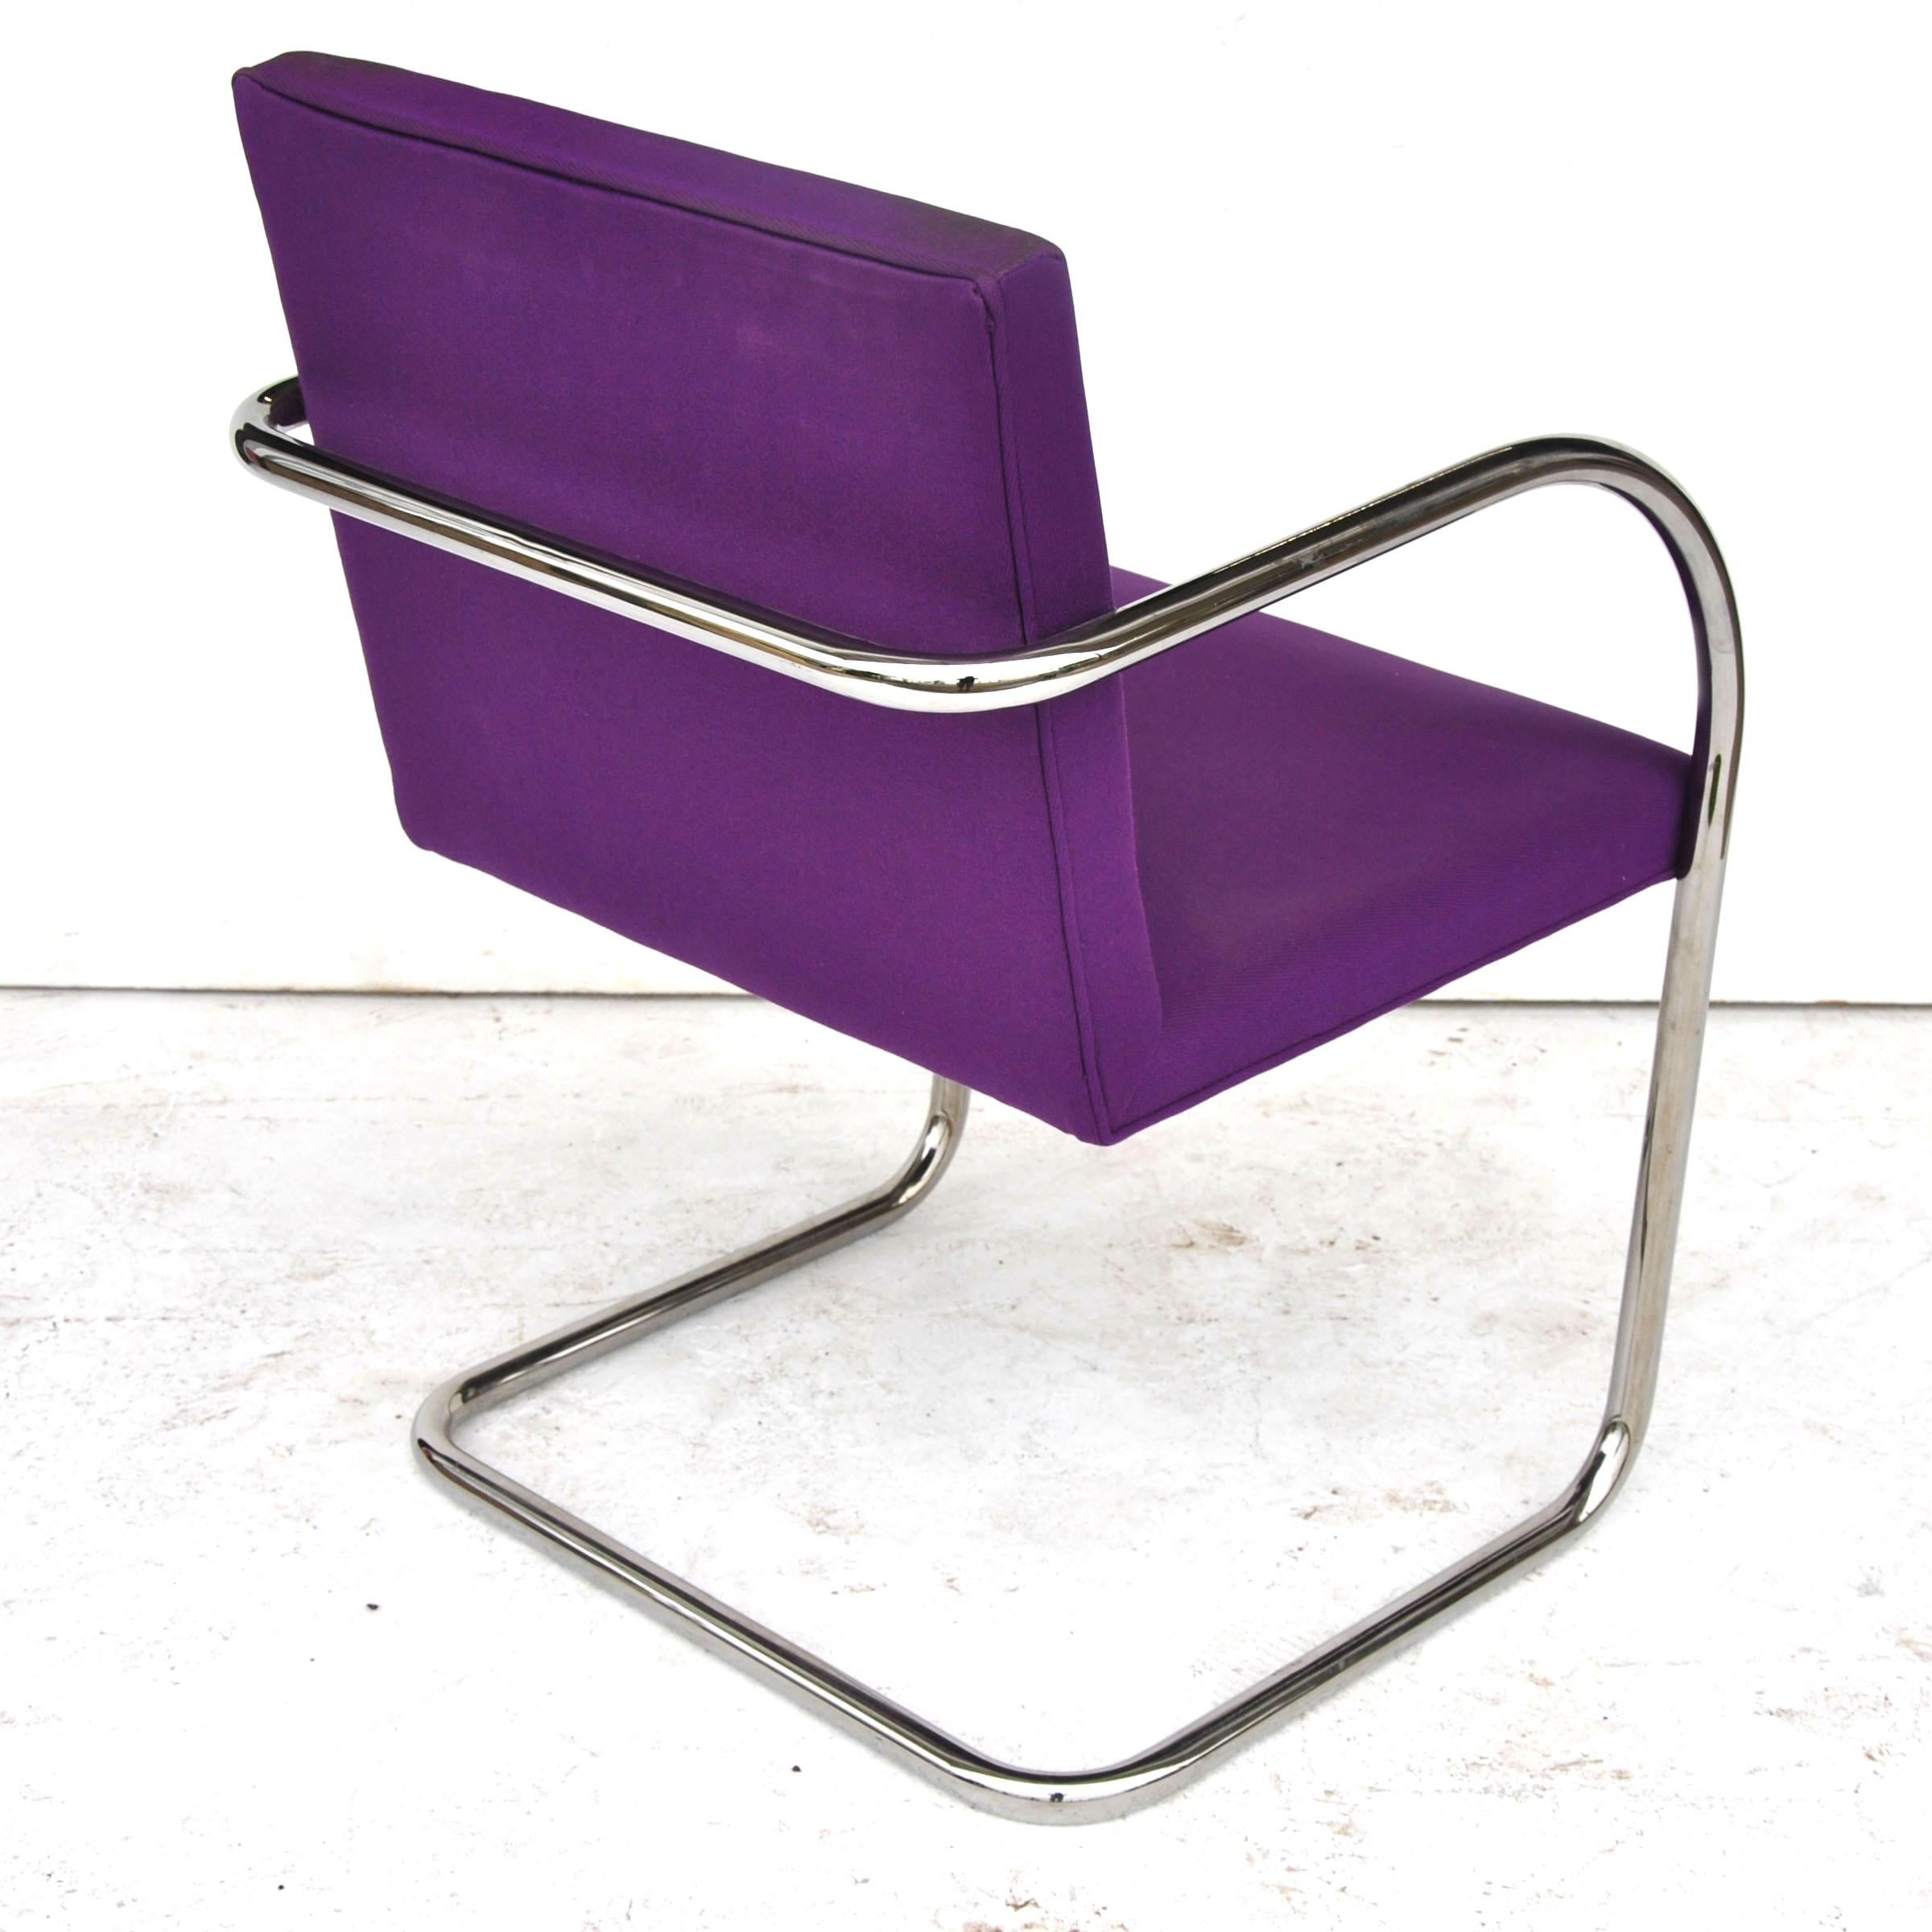 Mid-Century Modern 1 Midcentury Knoll Brno Stainless Tubular Chair by Ludwig Mies van der Rohe